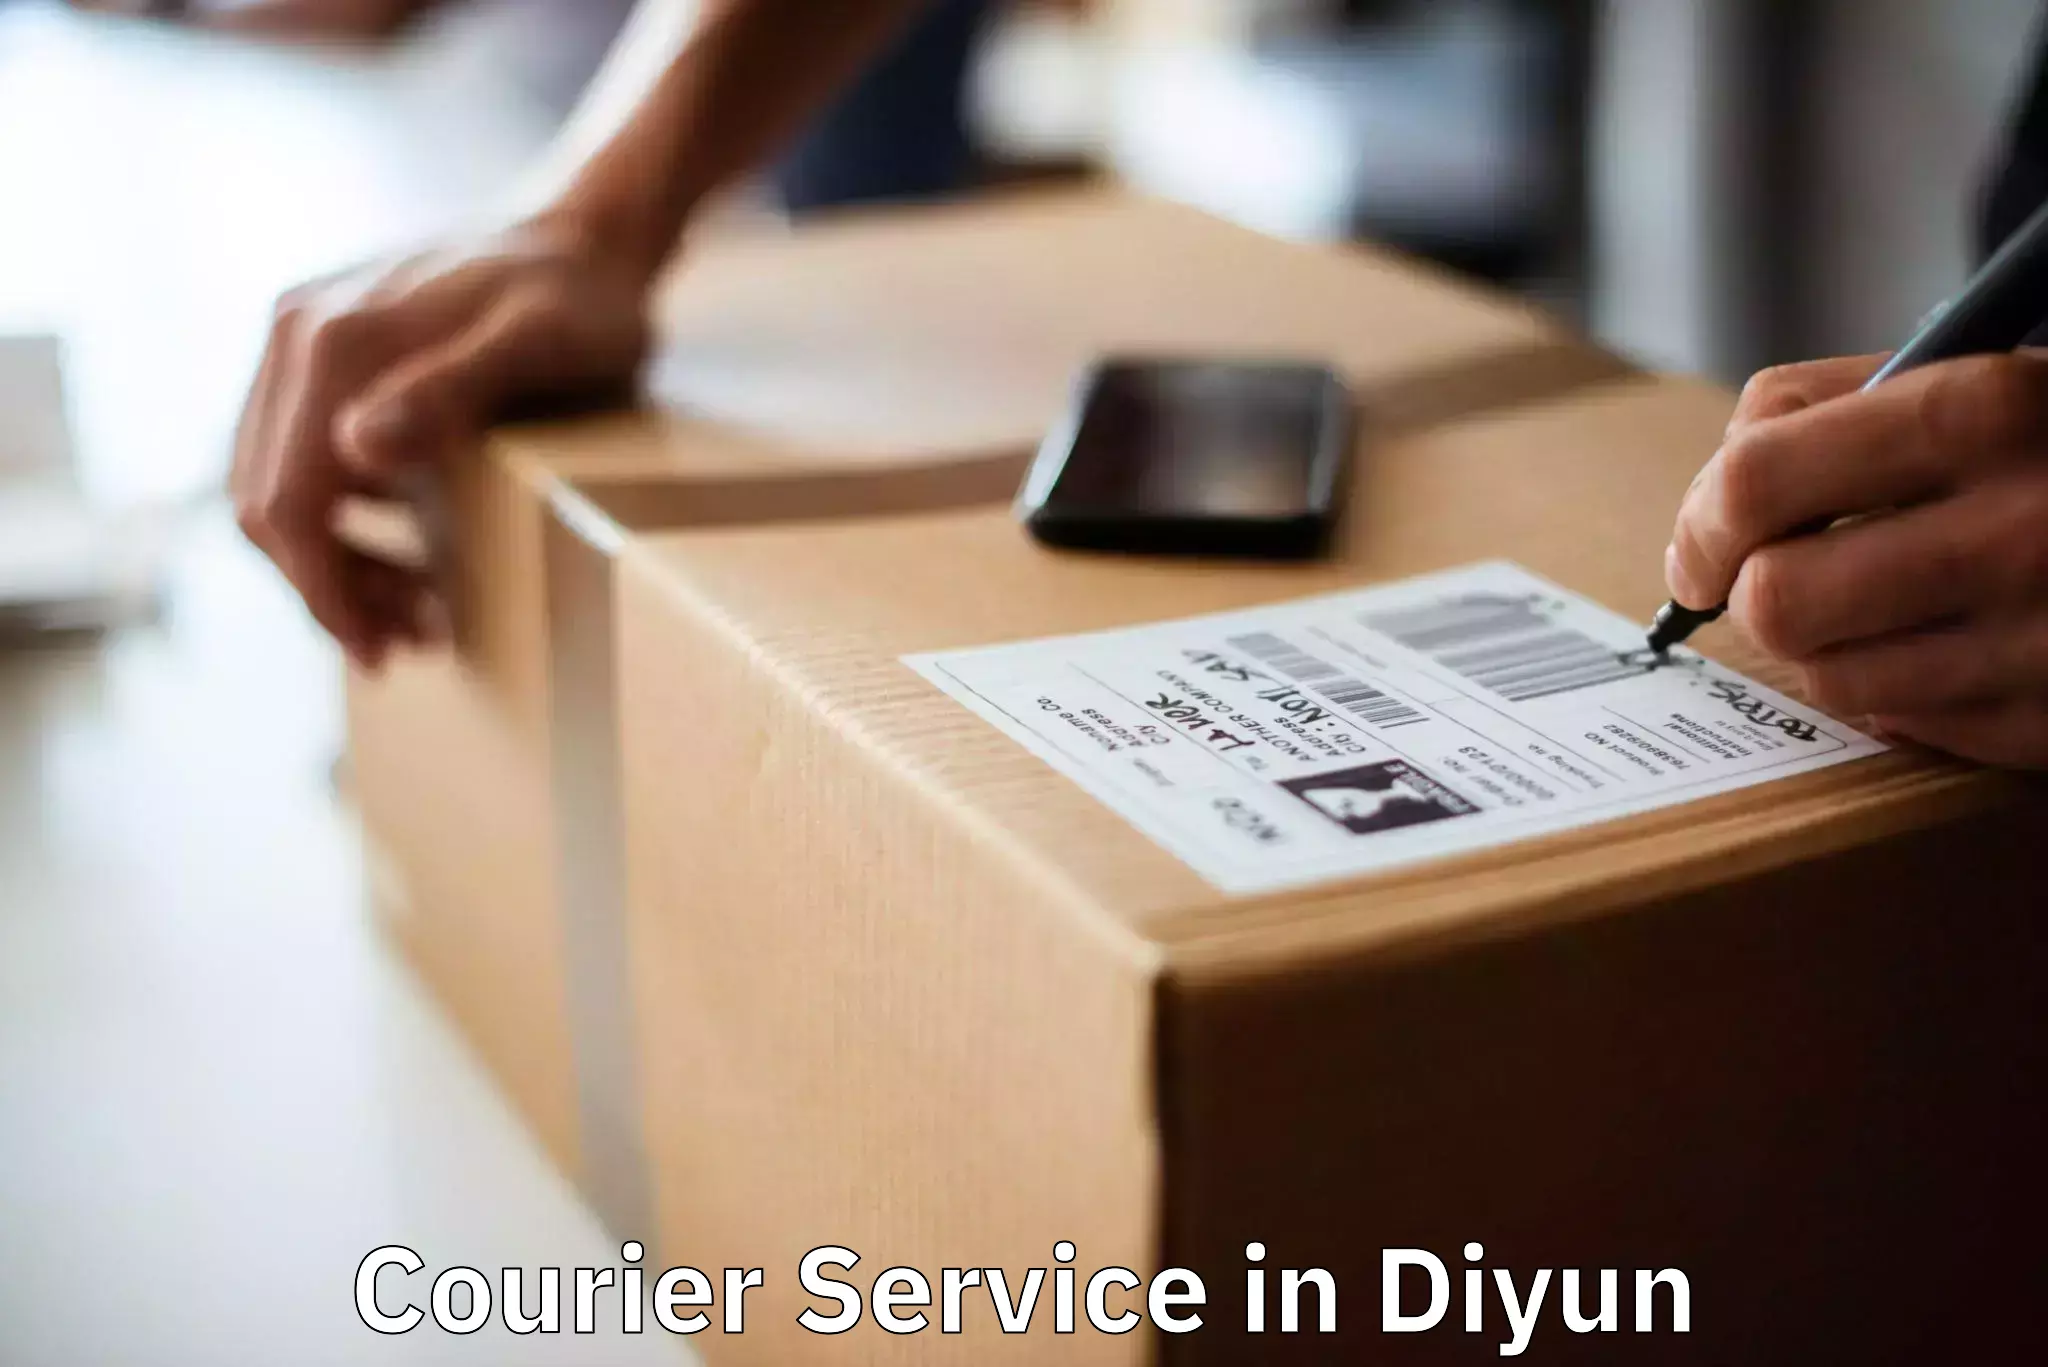 Automated parcel services in Diyun